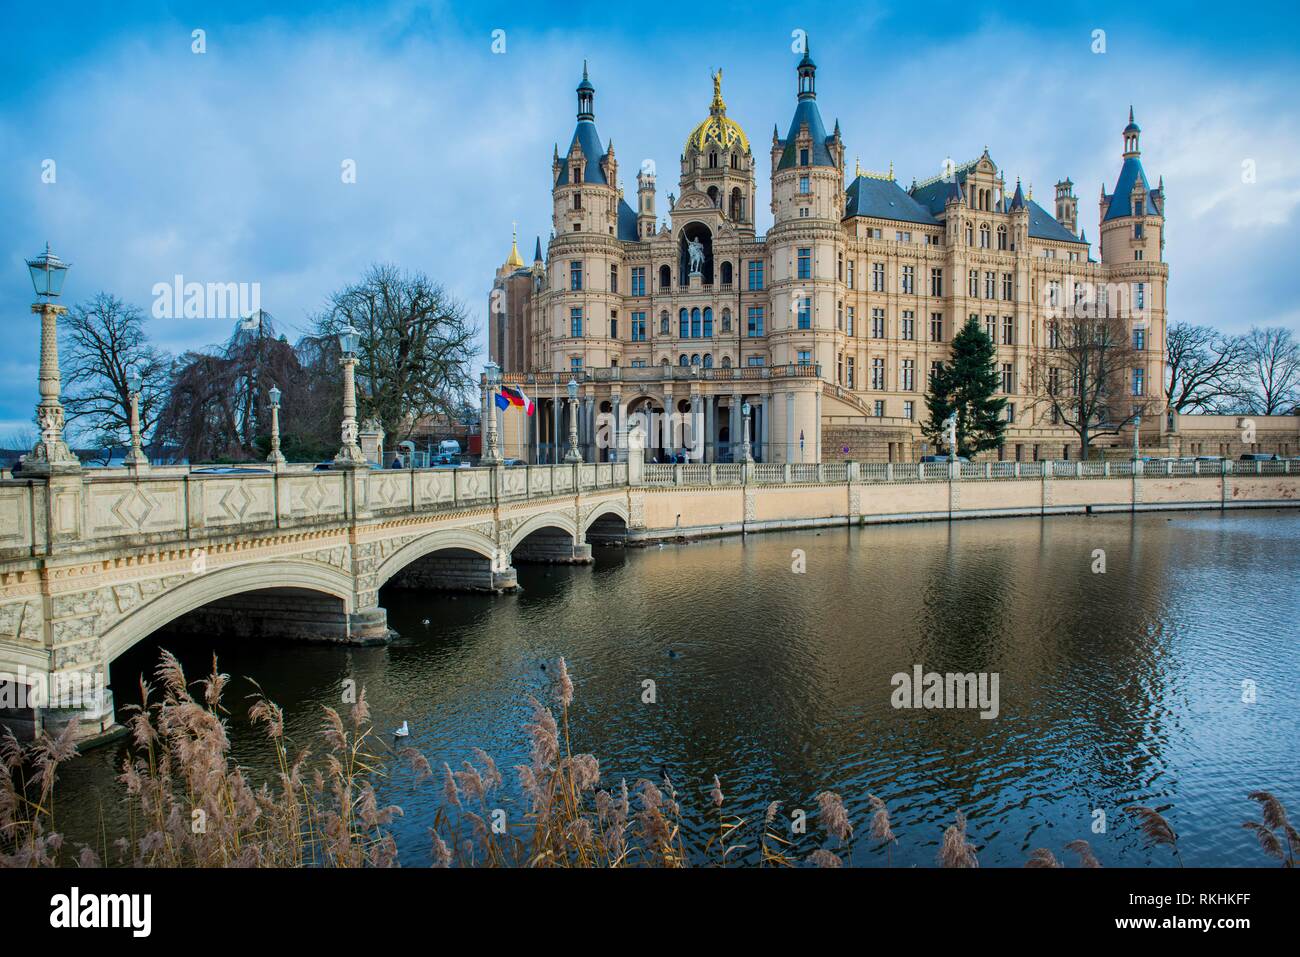 Schwerin Castle, State Parliament of Mecklenburg-Western Pomerania, Schwerin, Mecklenburg-Western Pomerania, Germany Stock Photo